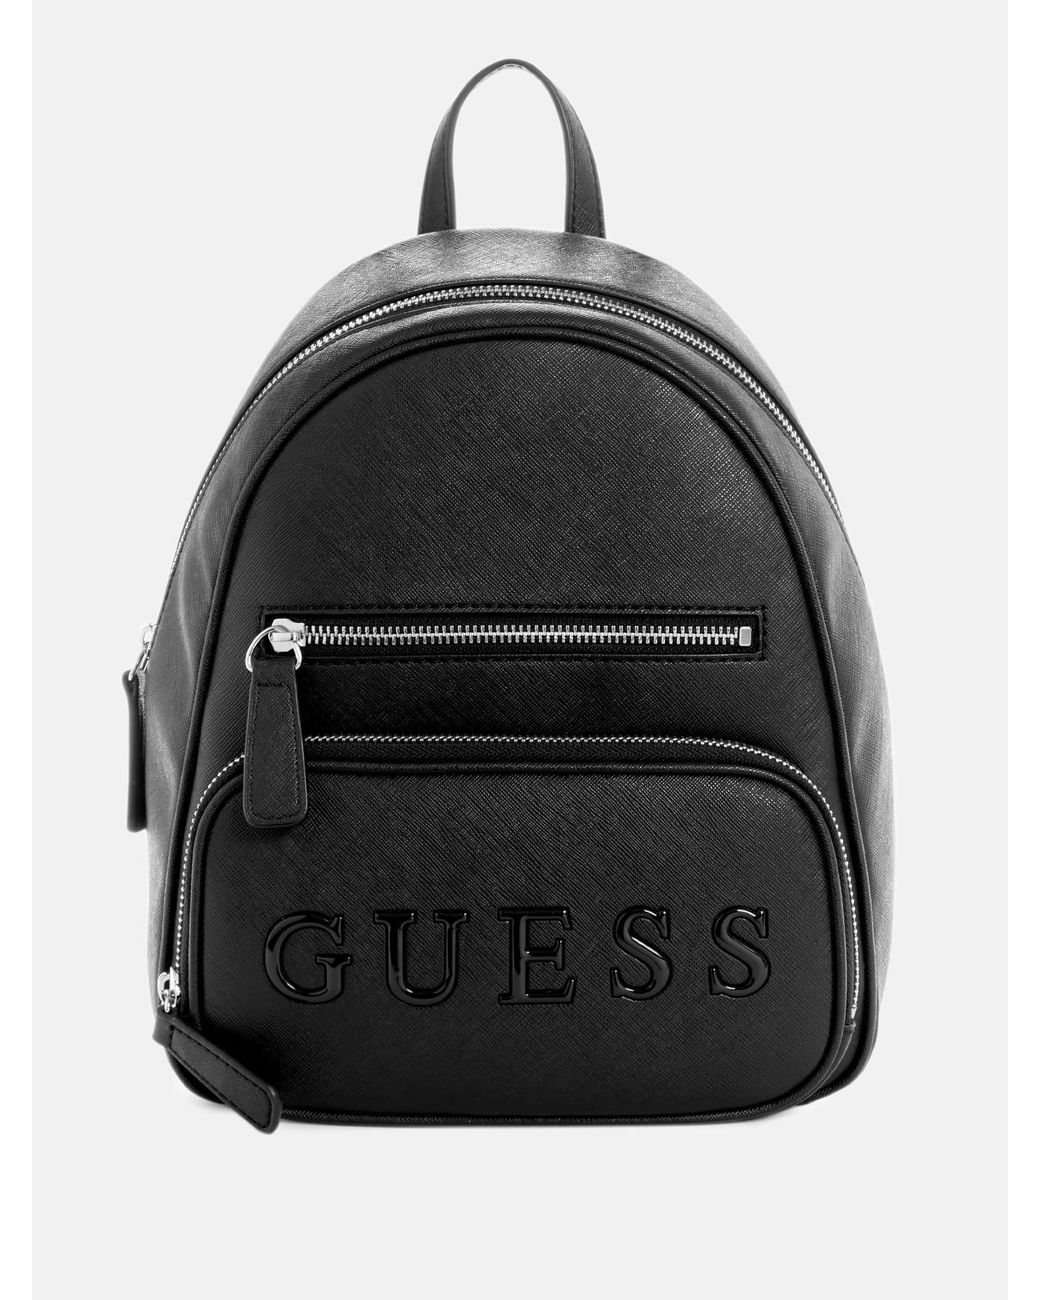 GUESS Women Abey Backpack, White, One Size : Buy Online at Best Price in  KSA - Souq is now Amazon.sa: Fashion